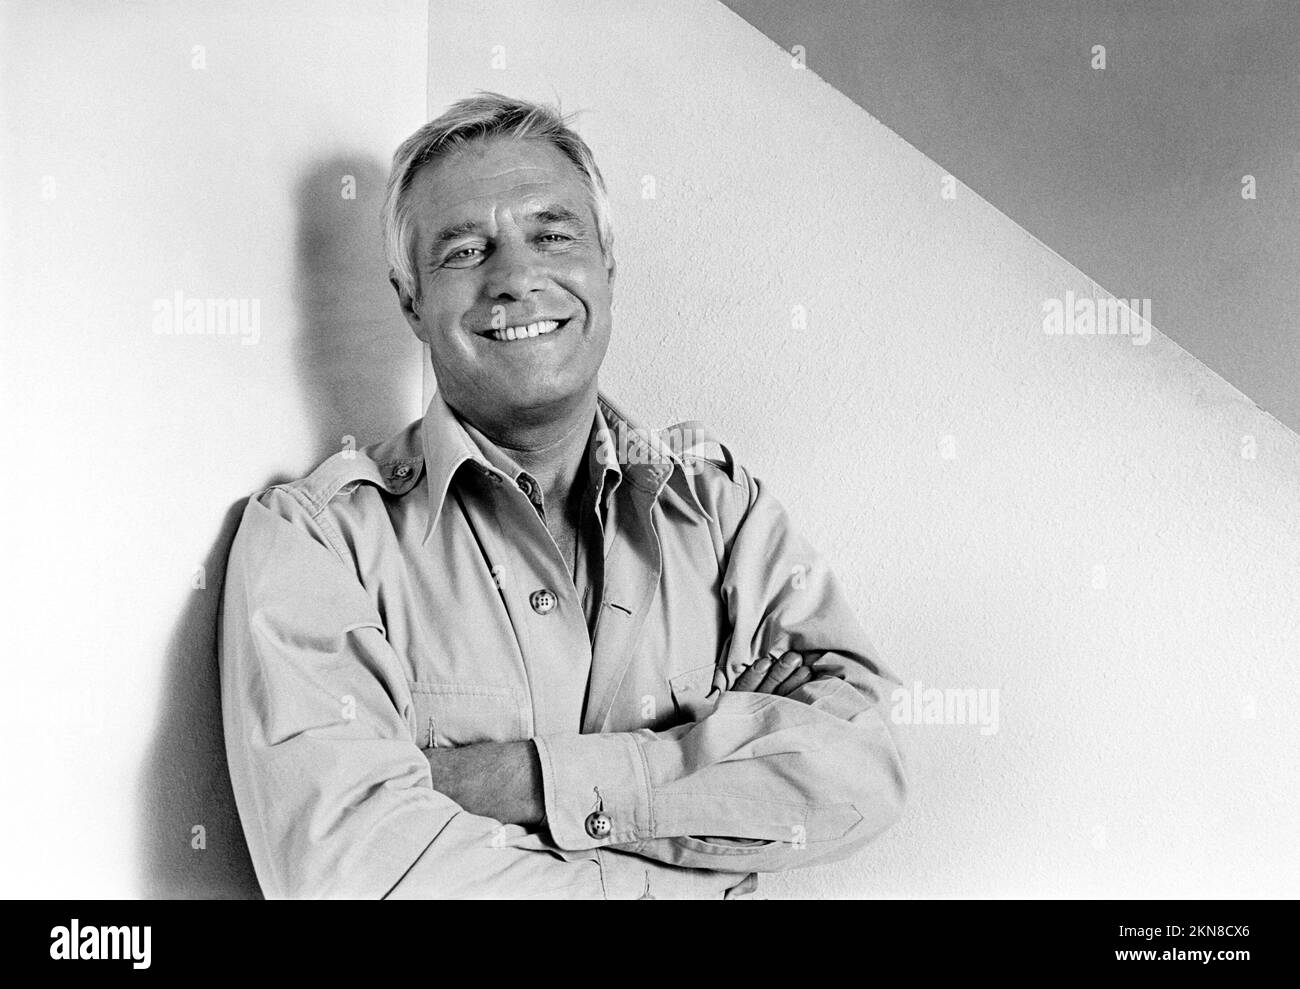 GEORGE PEPPARD in THE A-TEAM (1983), directed by STEPHEN J. CANNELL and FRANK LUPO. Credit: STEPHEN J. CANNELL PRODUCTIONS/UNIVERSAL TV / Album Stock Photo